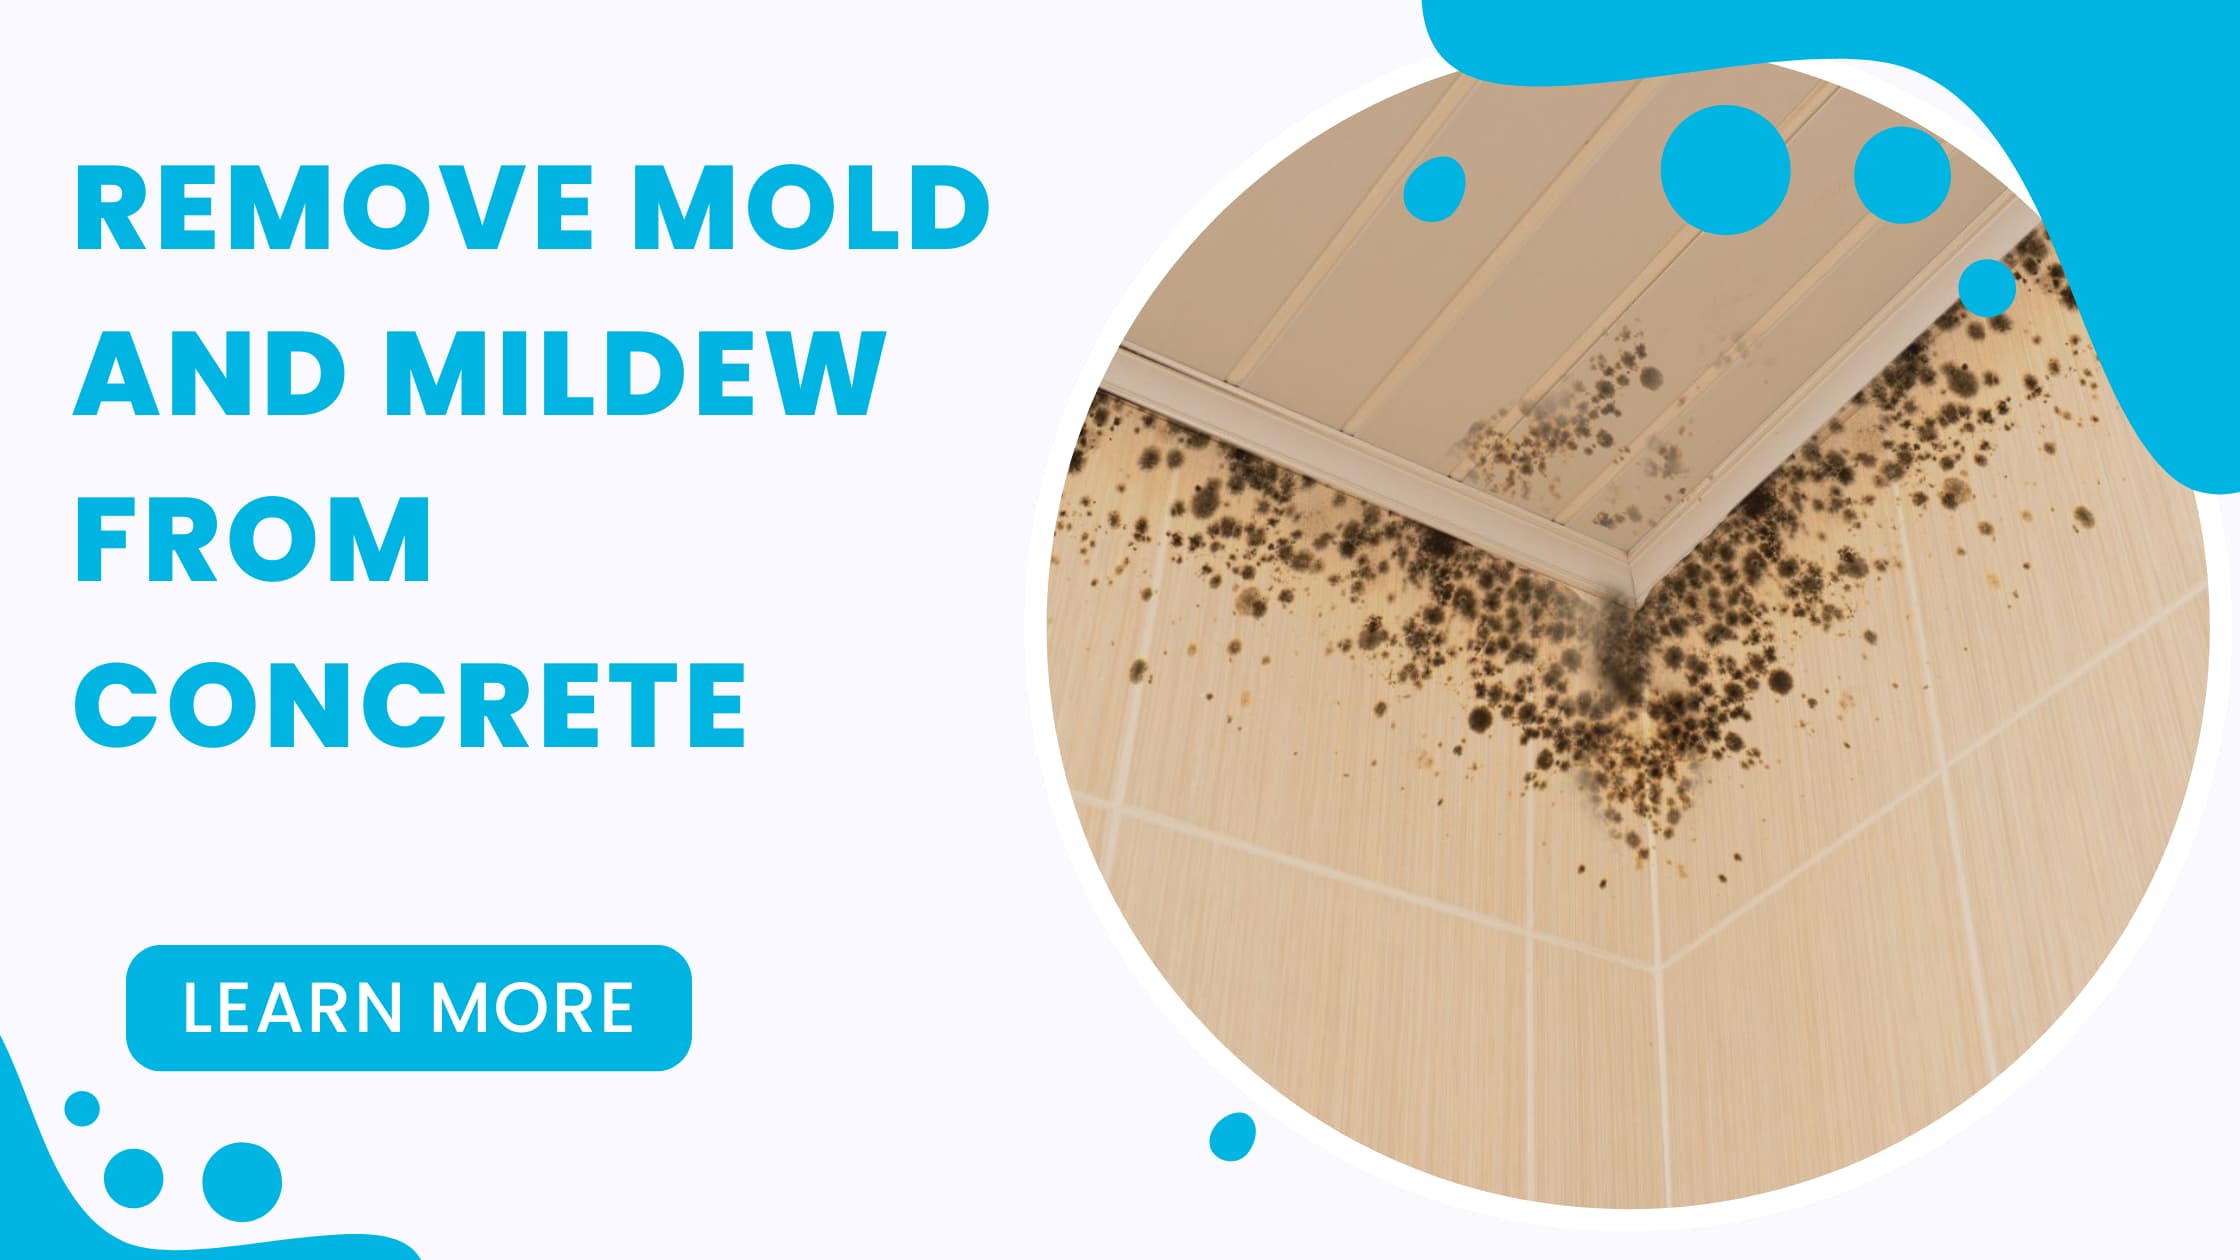 Remove Mold and Mildew From Concrete